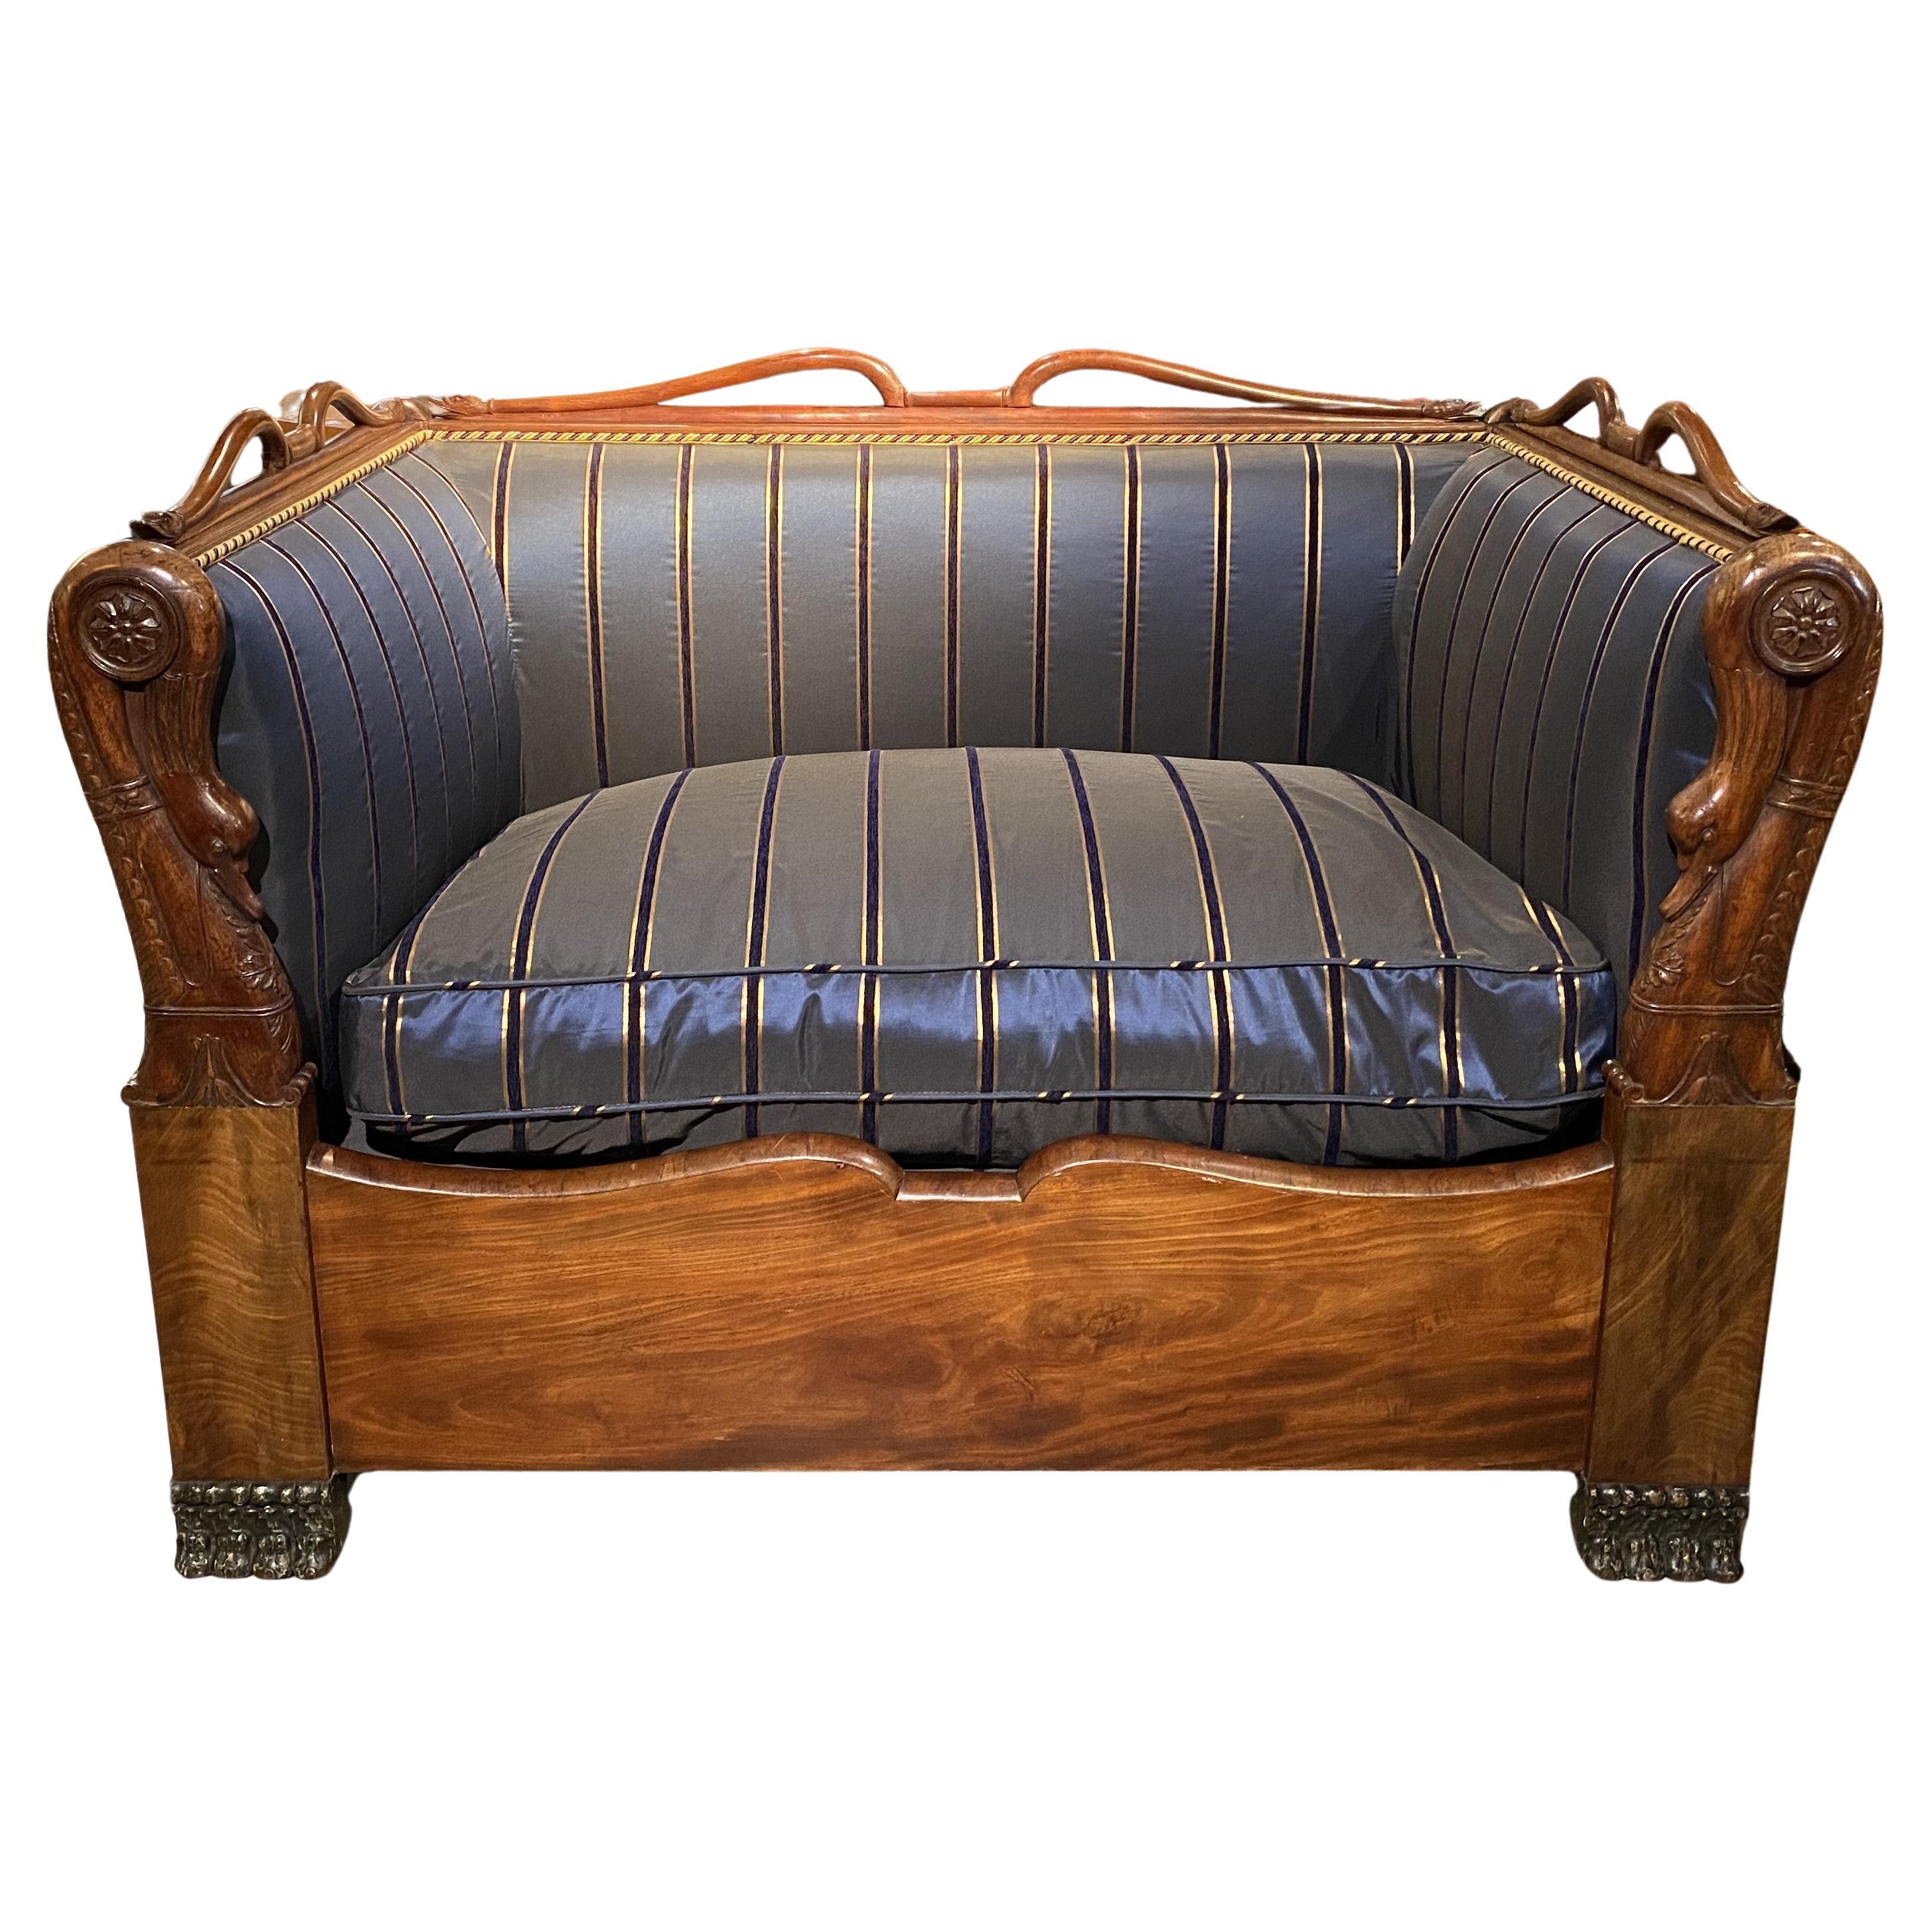 19th Century French Empire “Kissing Settee” with Privacy Screens For Sale